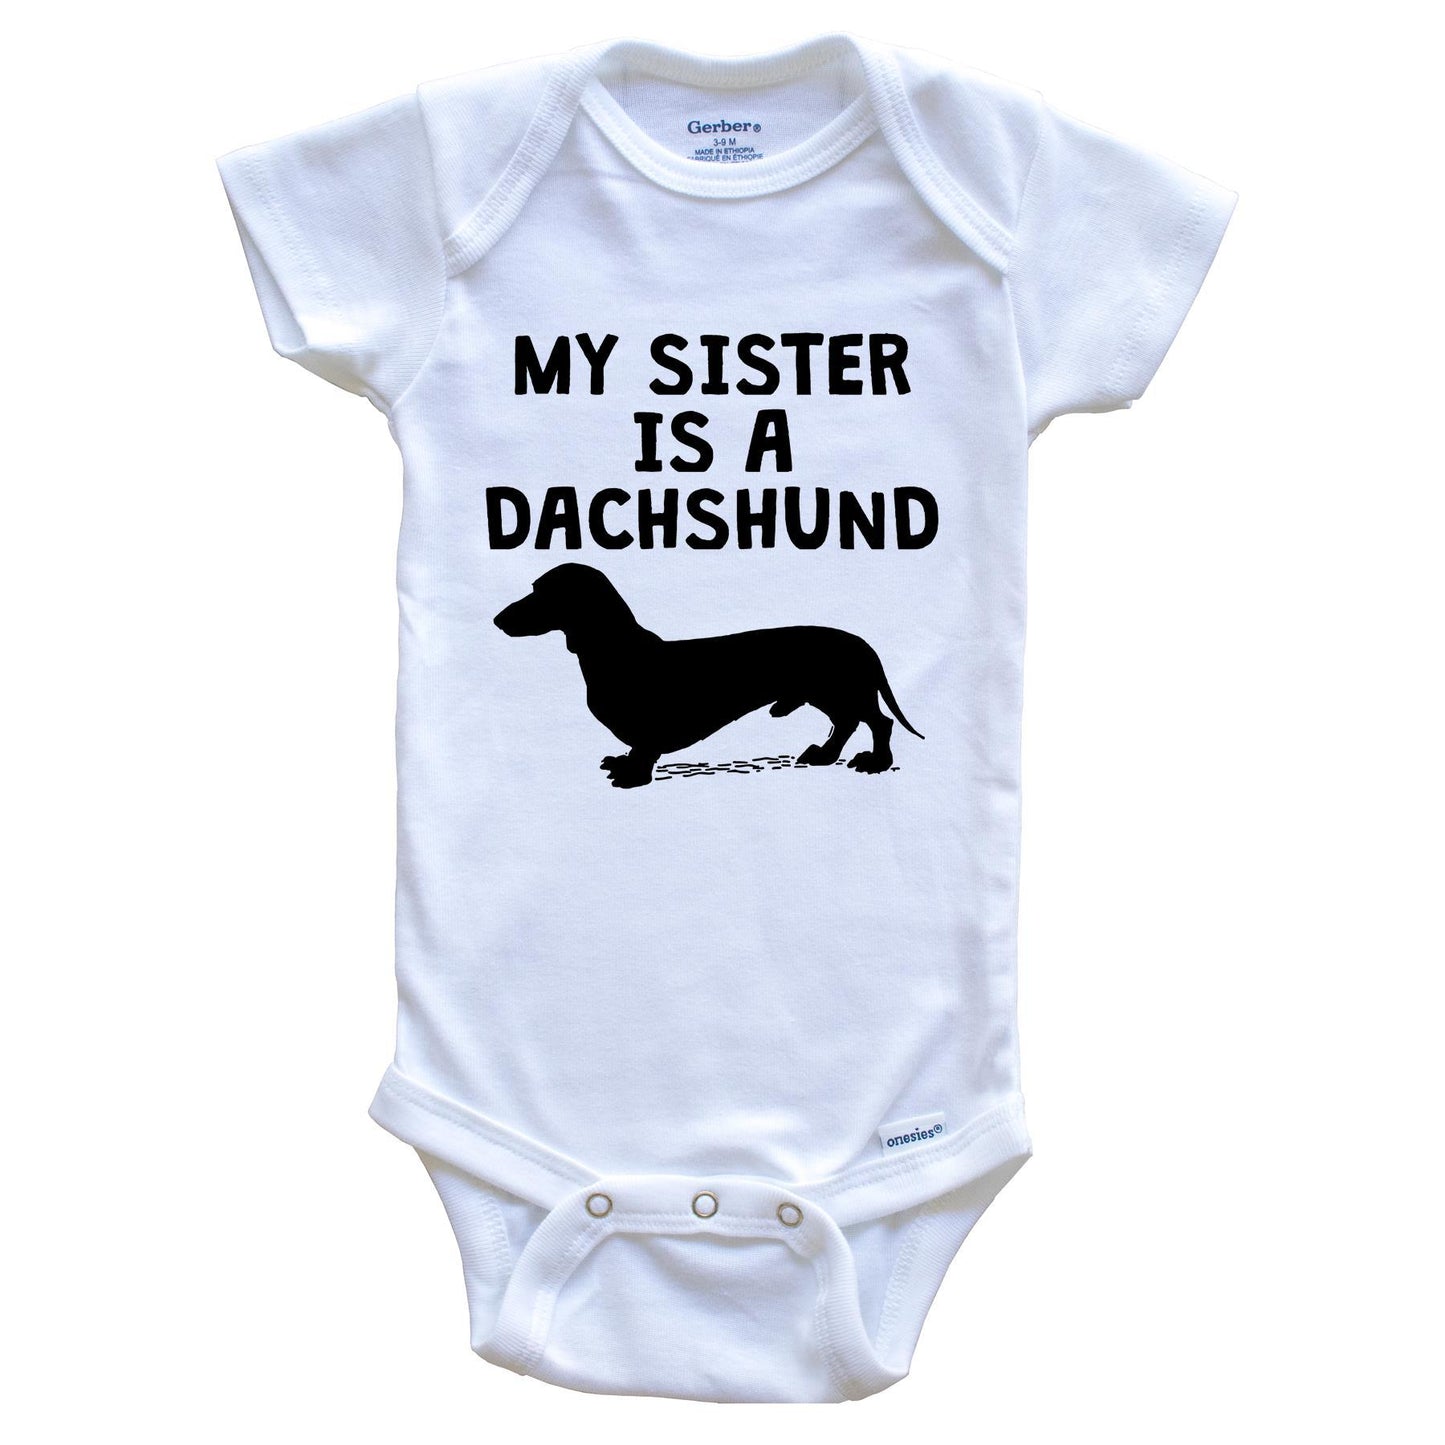 My Sister Is A Dachshund Baby Onesie